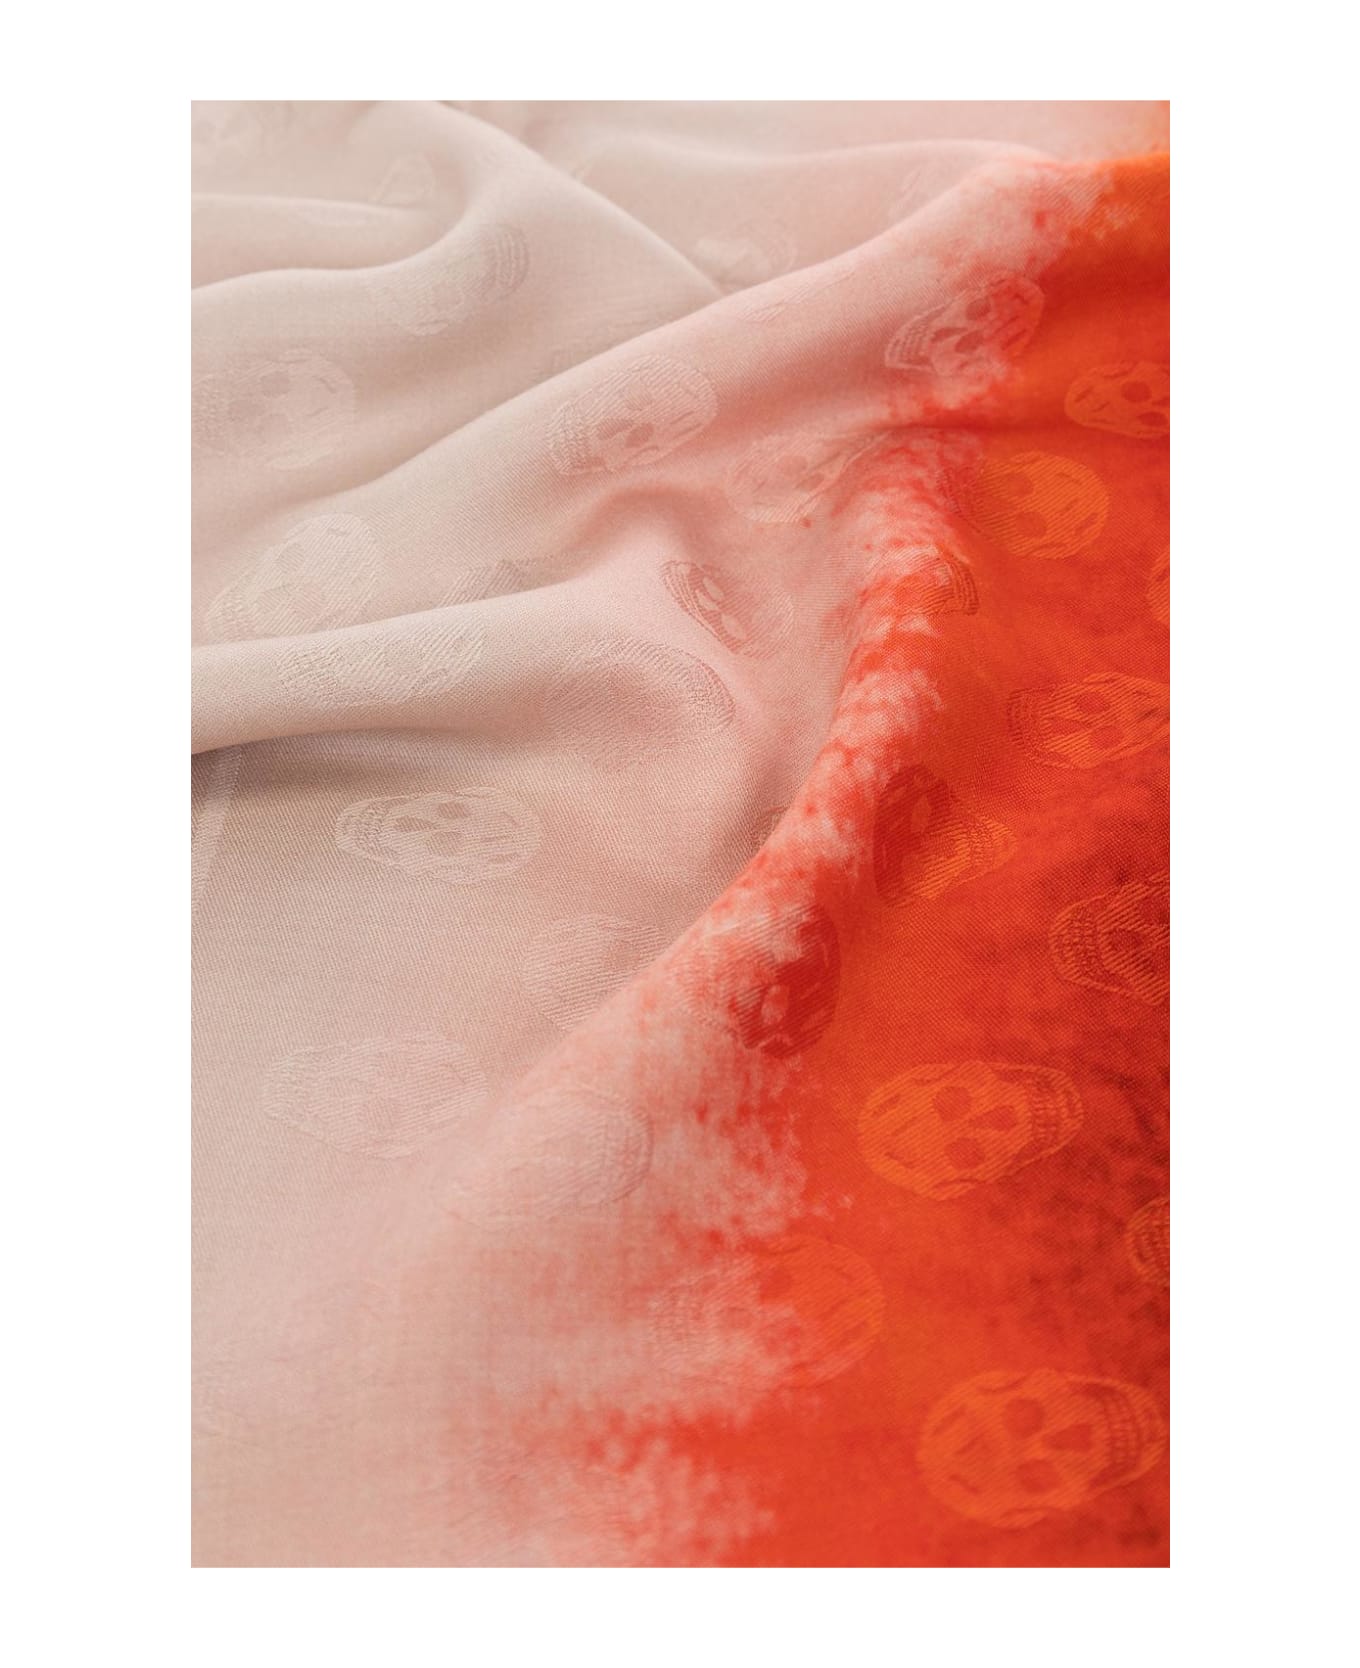 Alexander McQueen Pink And Orange Scarf With Skull Pattern - Arancione